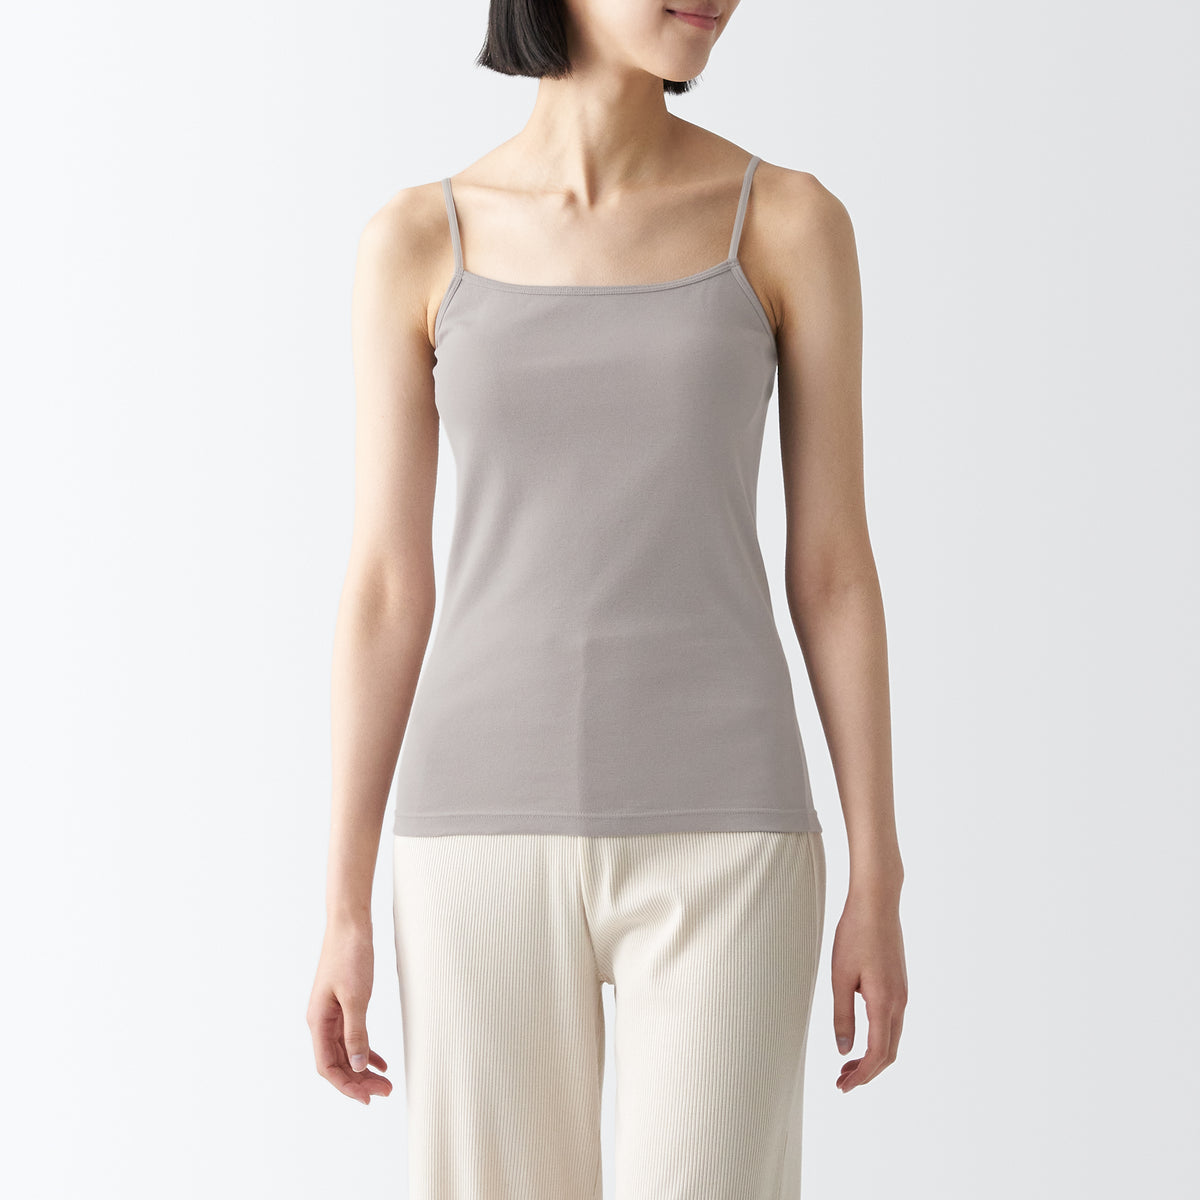 Hemp and Organic Cotton Comfy Cami by Texture Clothing